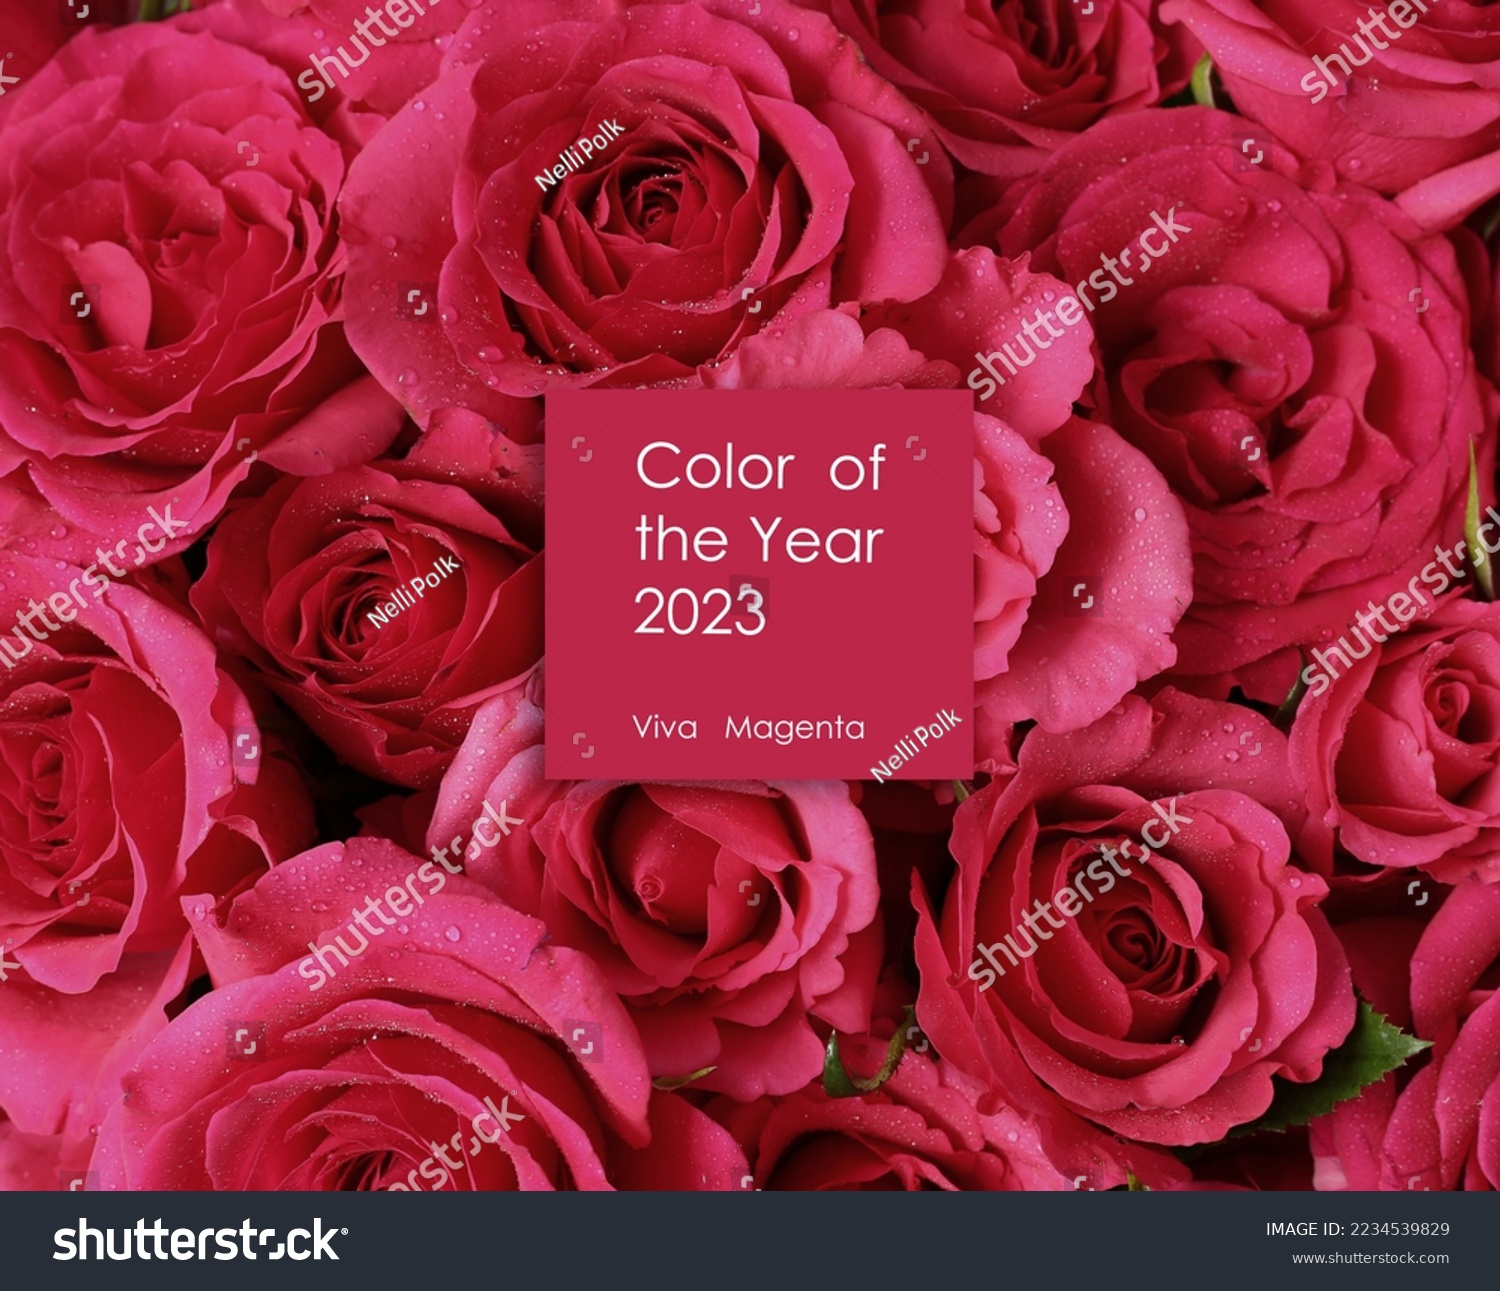 Trendy color of 2023 Viva Magenta. Flowers toned in magenta colour. Text Color of the year 2023 Viva Magenta over flat lay roses #2234539829